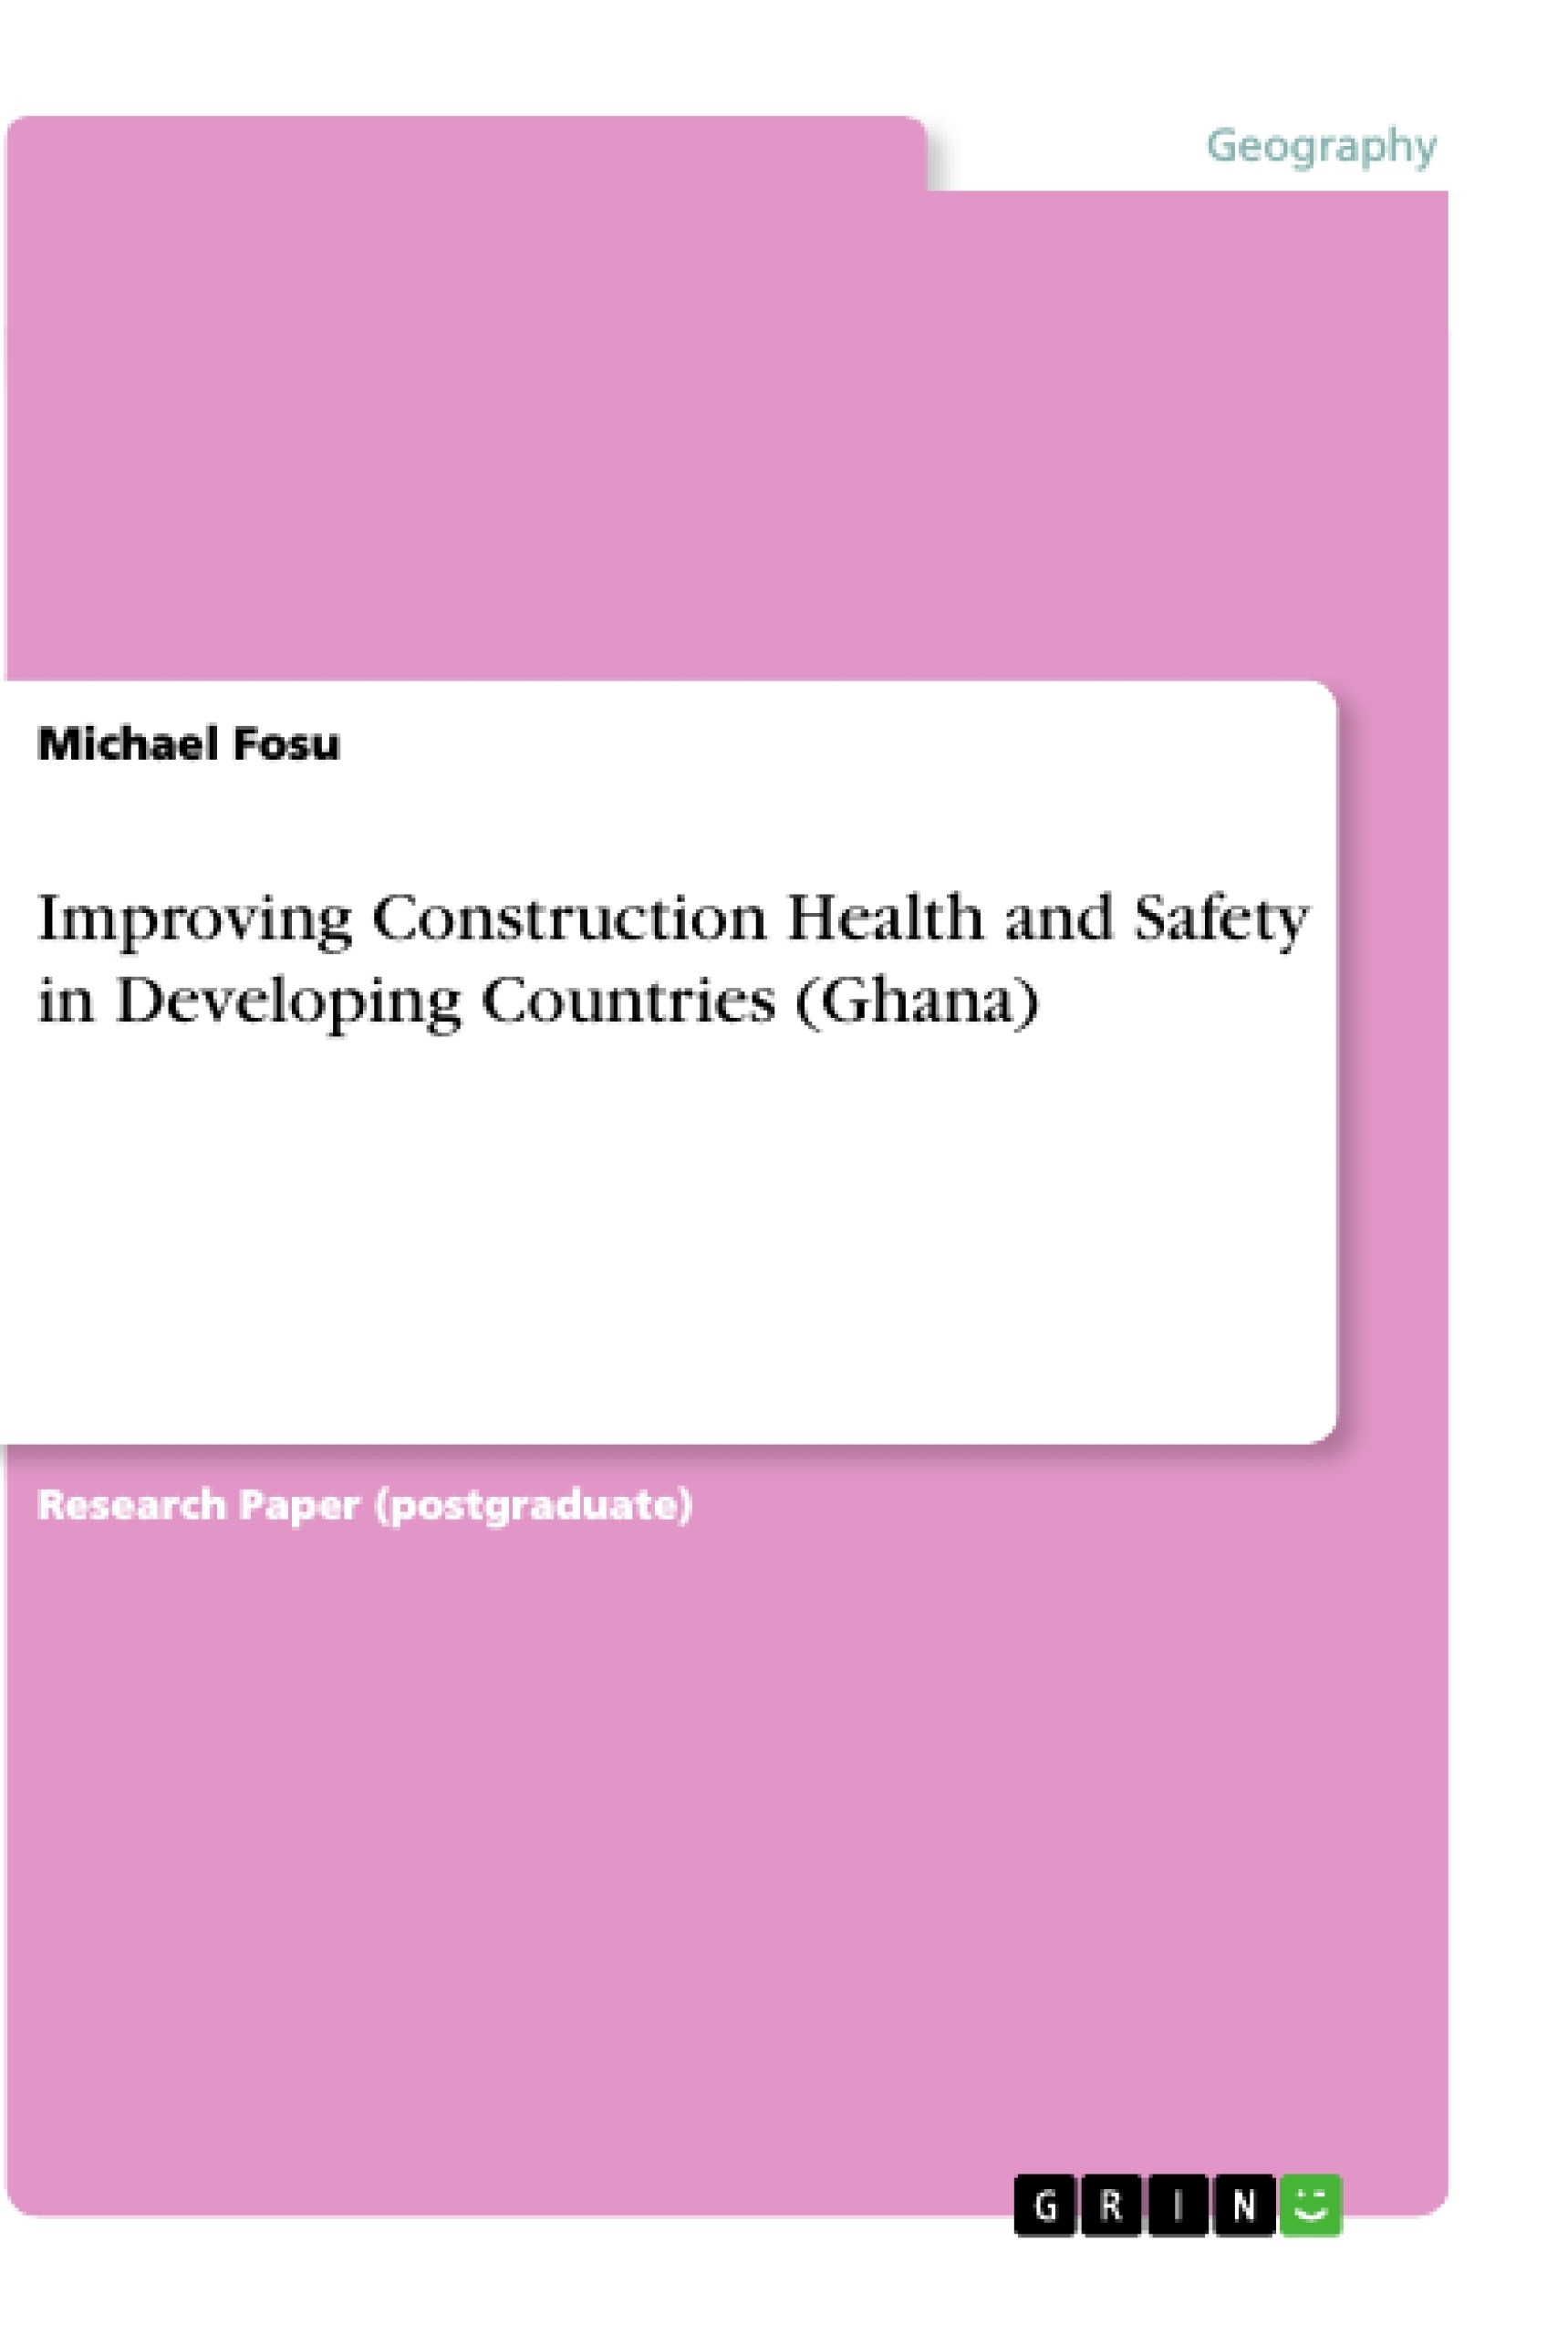 Title: Improving Construction Health and Safety in Developing Countries (Ghana)